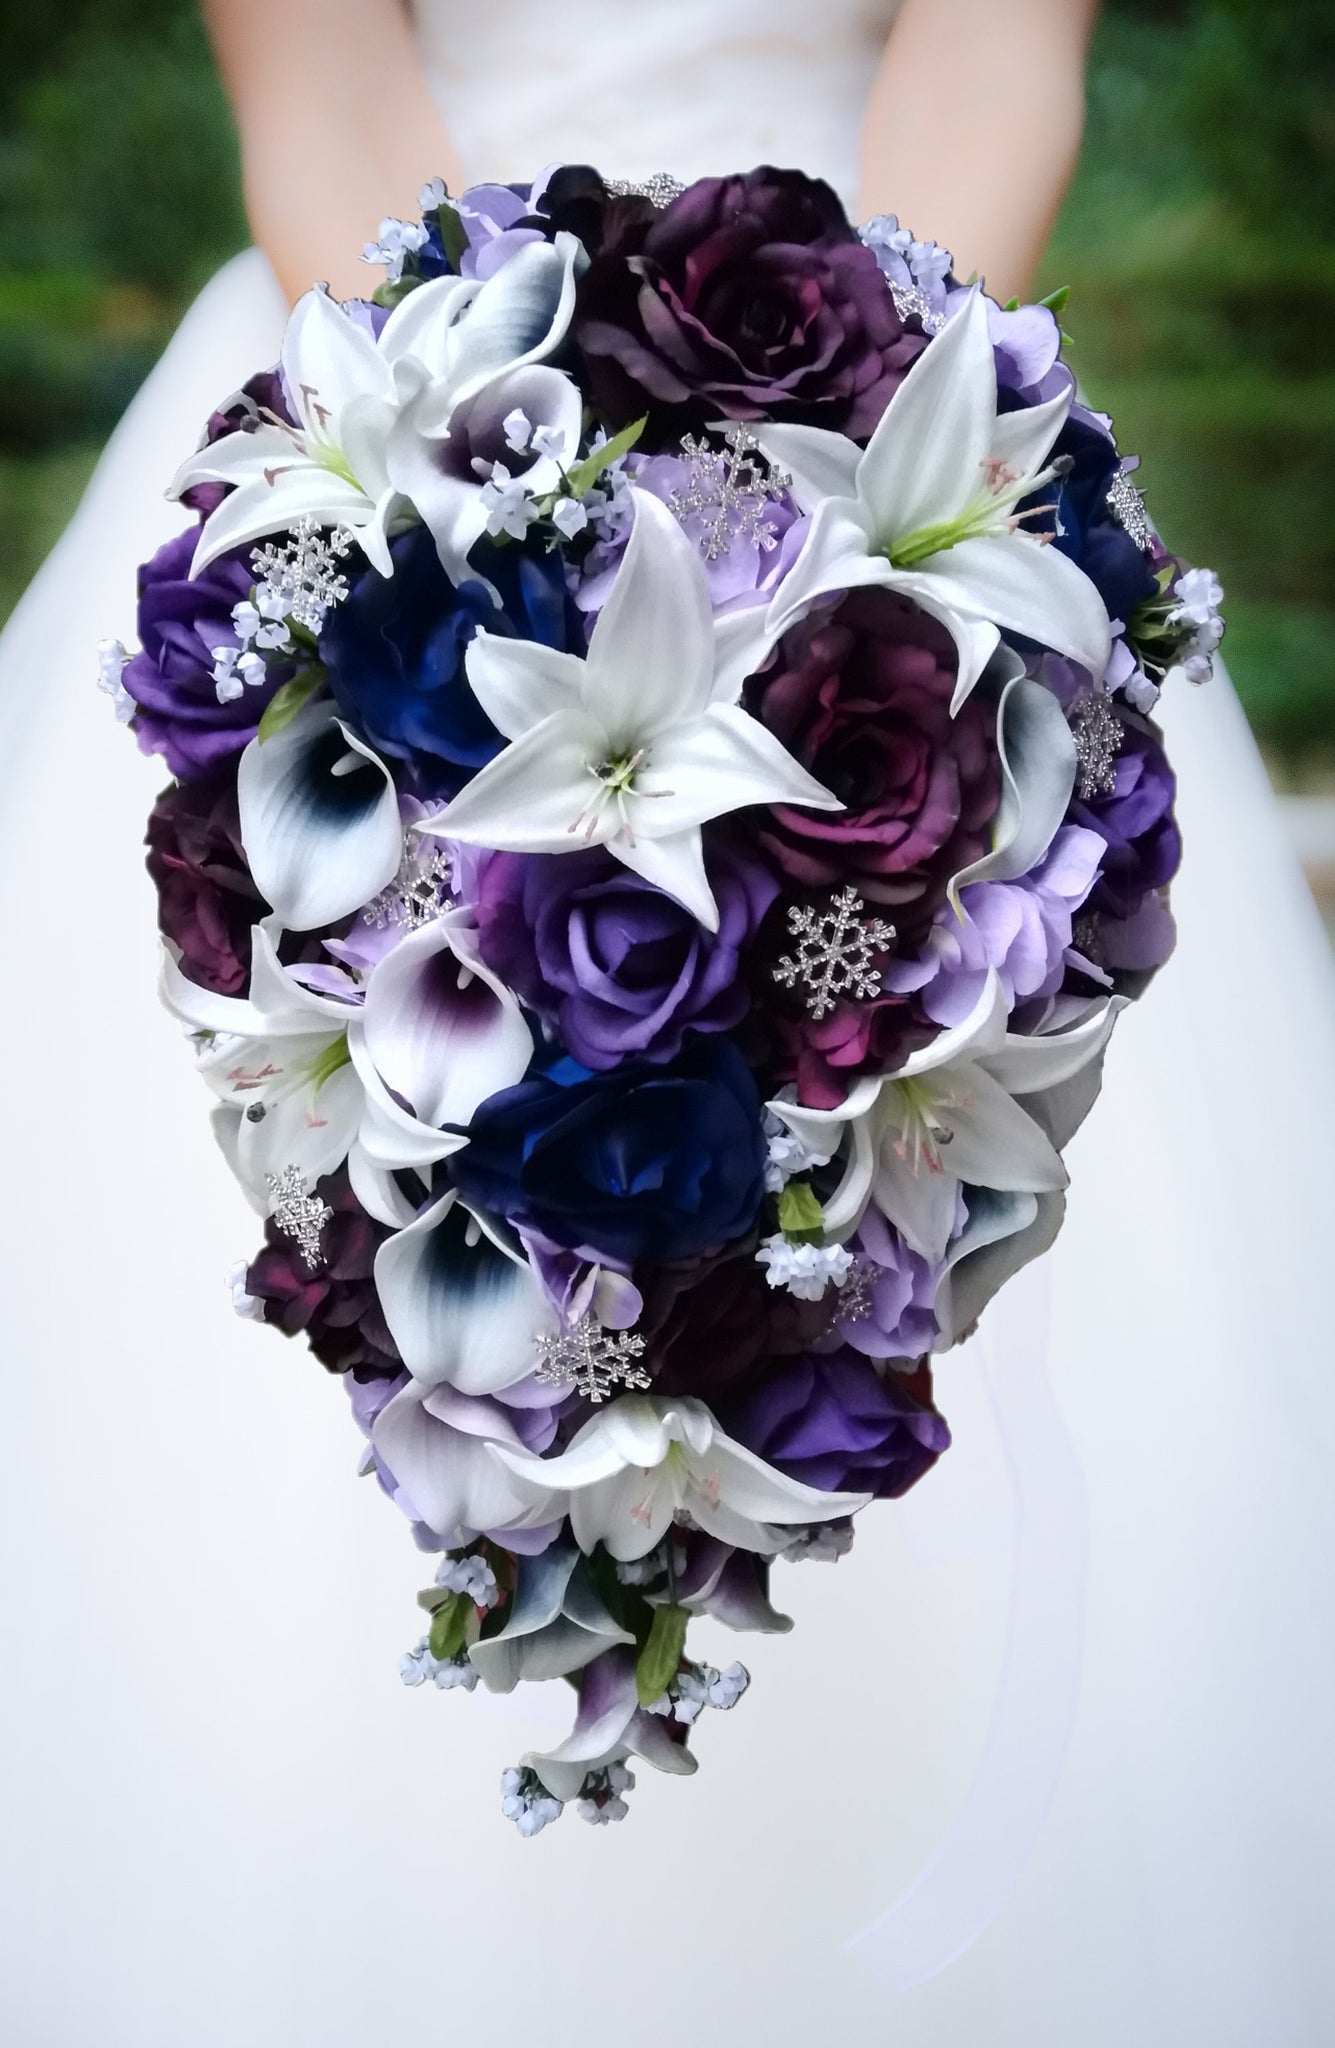 Cascade Bridal Bouquet Real Touch Plum Purple Roses Calla Tiger Lilies - Add Groom Boutonniere Flower Crown Wedding Arch Flowers & More!